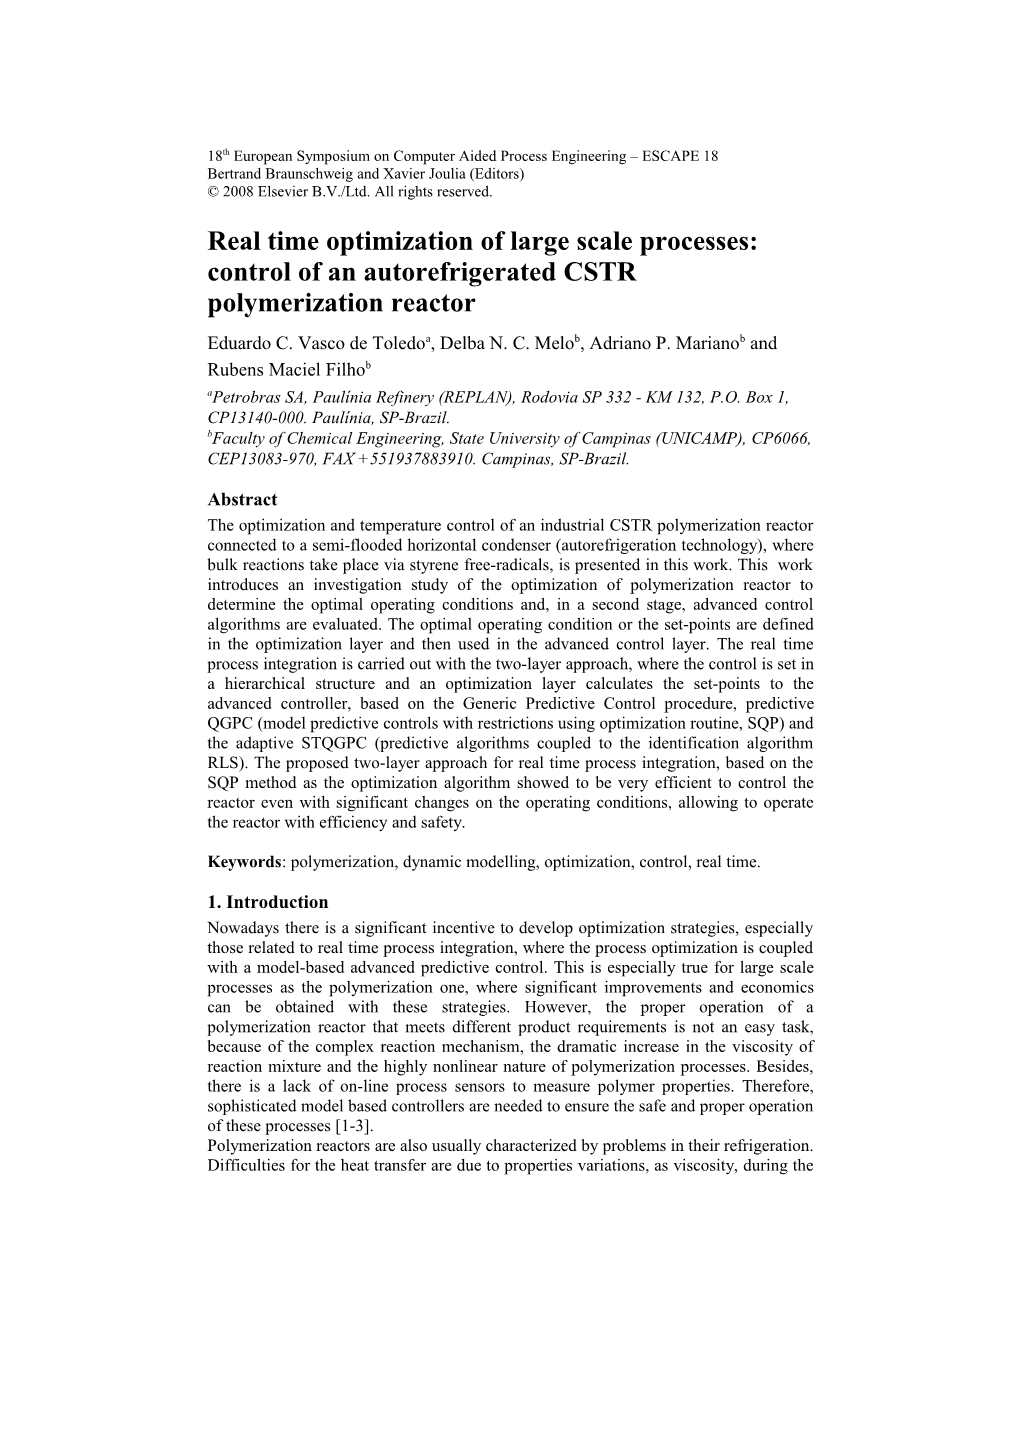 Real Time Optimization of Large Scale Processes: Control of an Autorefrigerated CSTR